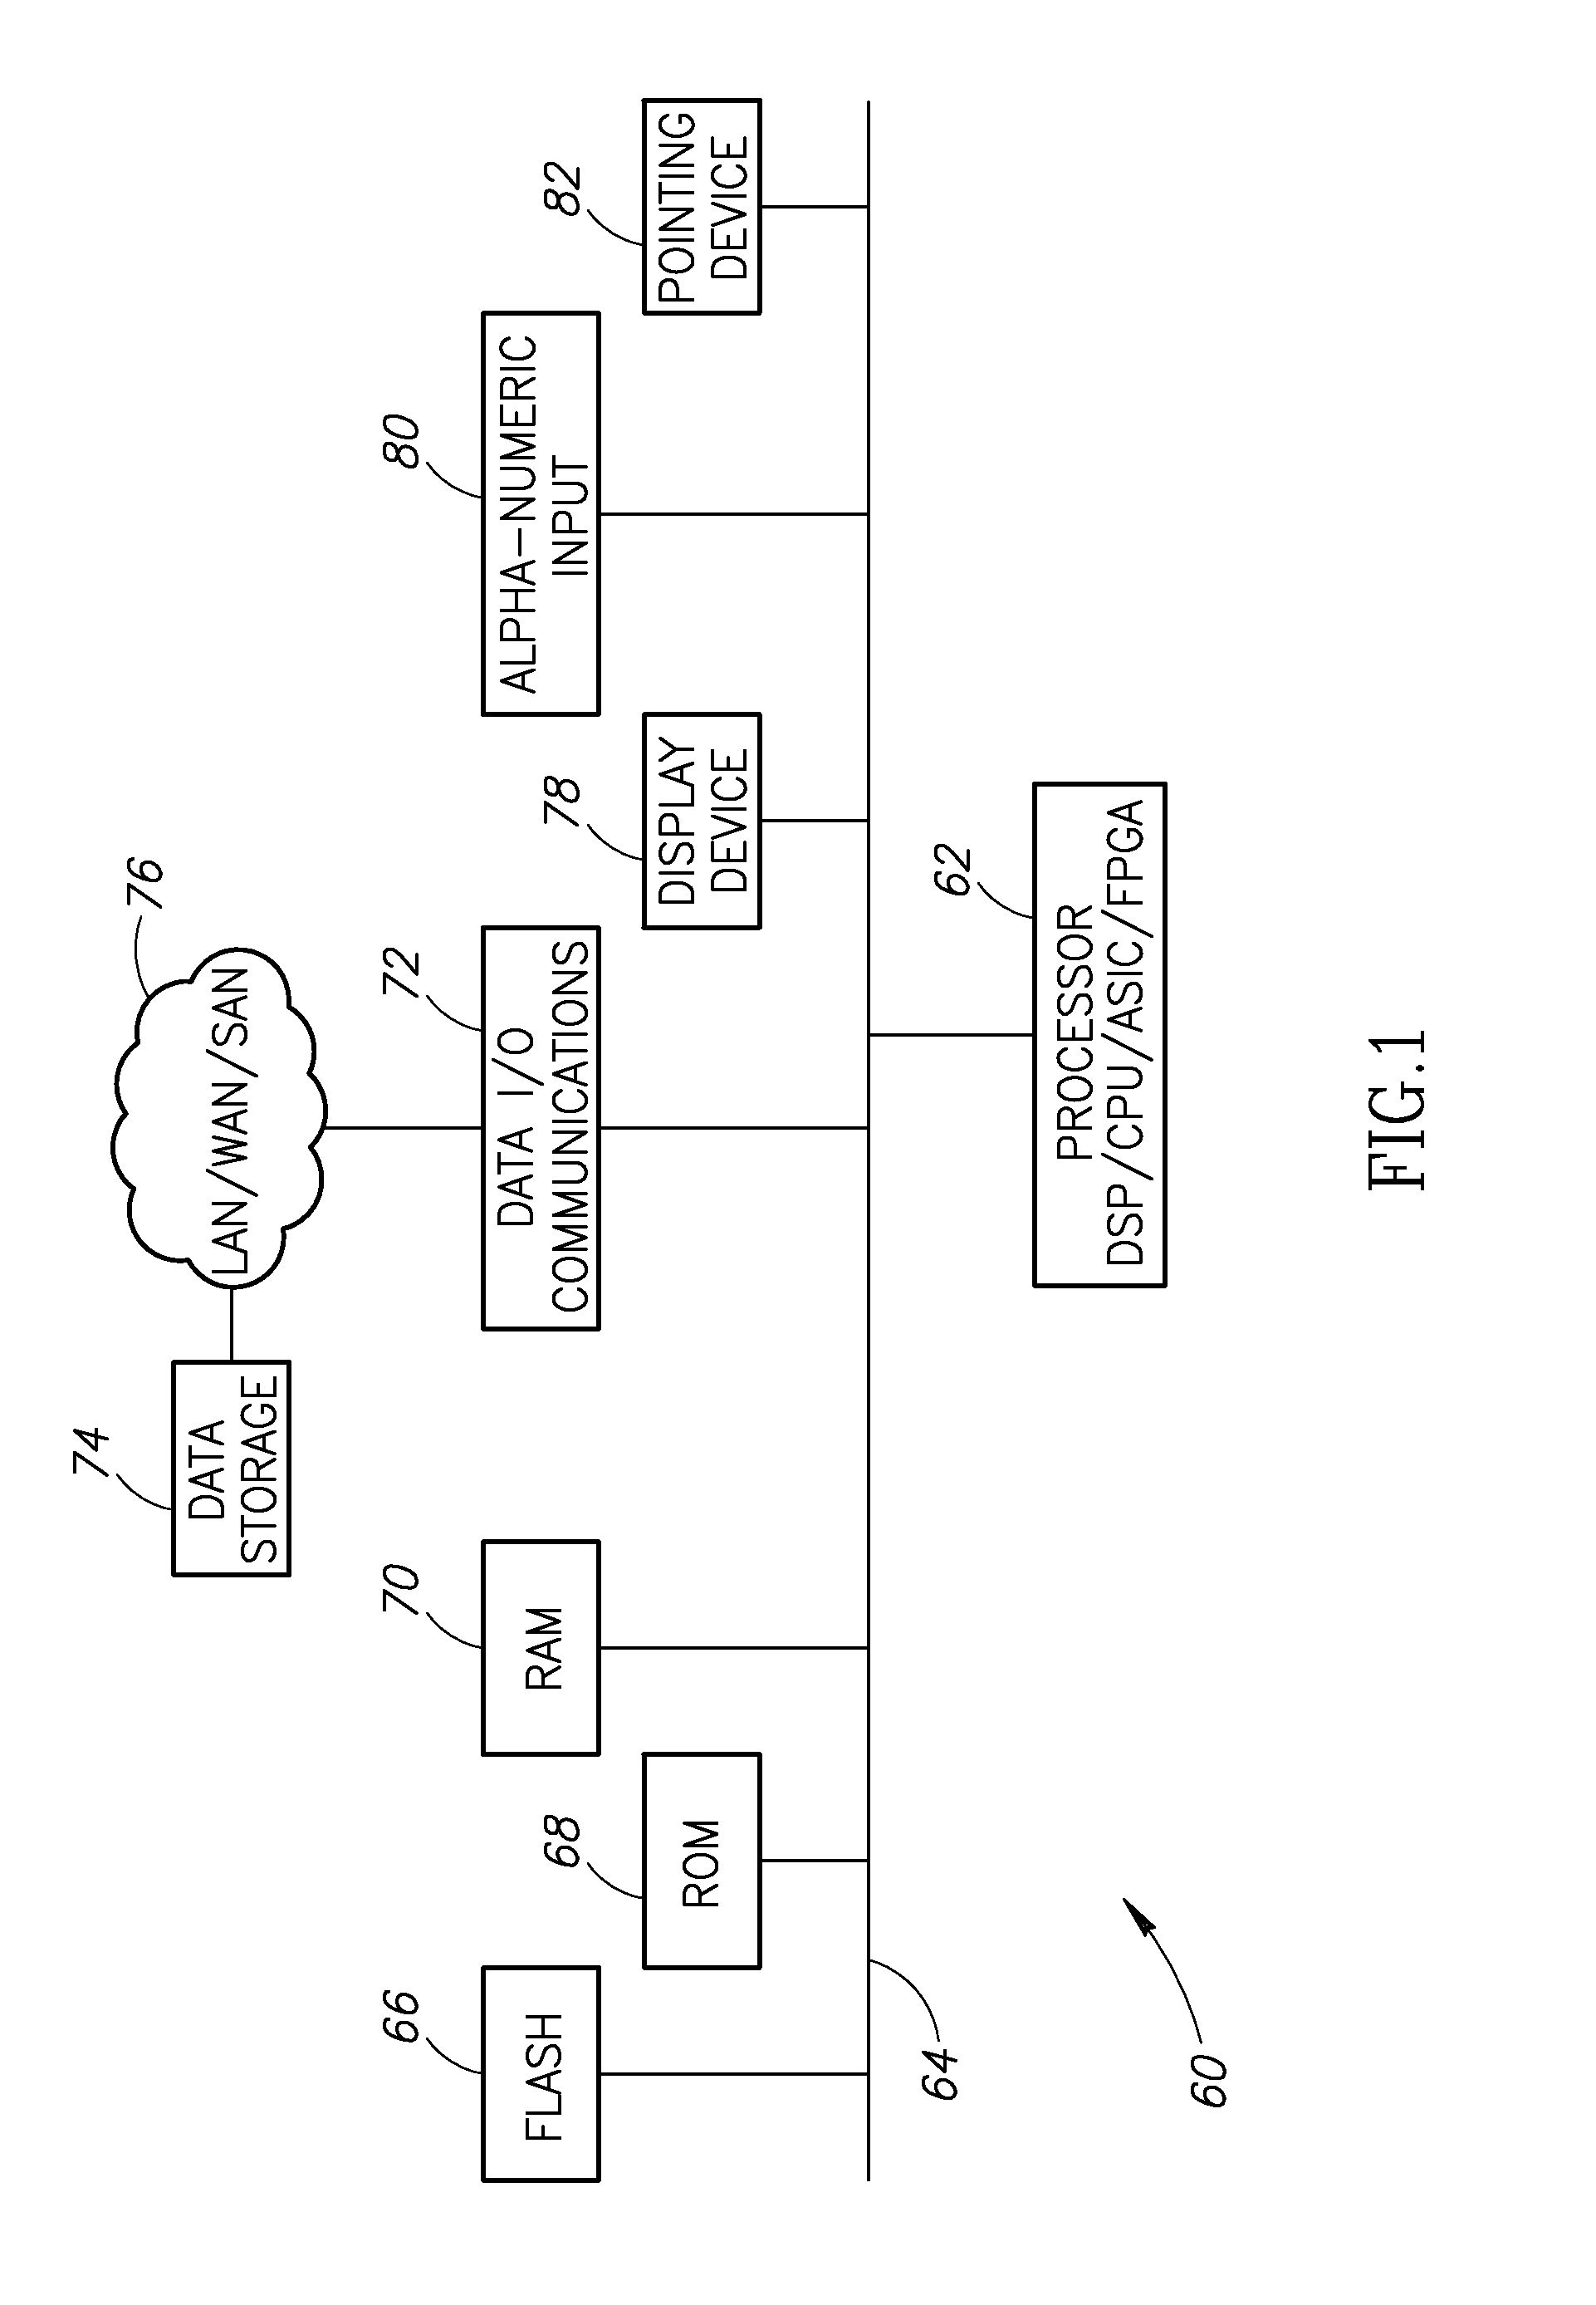 System and method for adaptive nonlinear compressed visual sensing